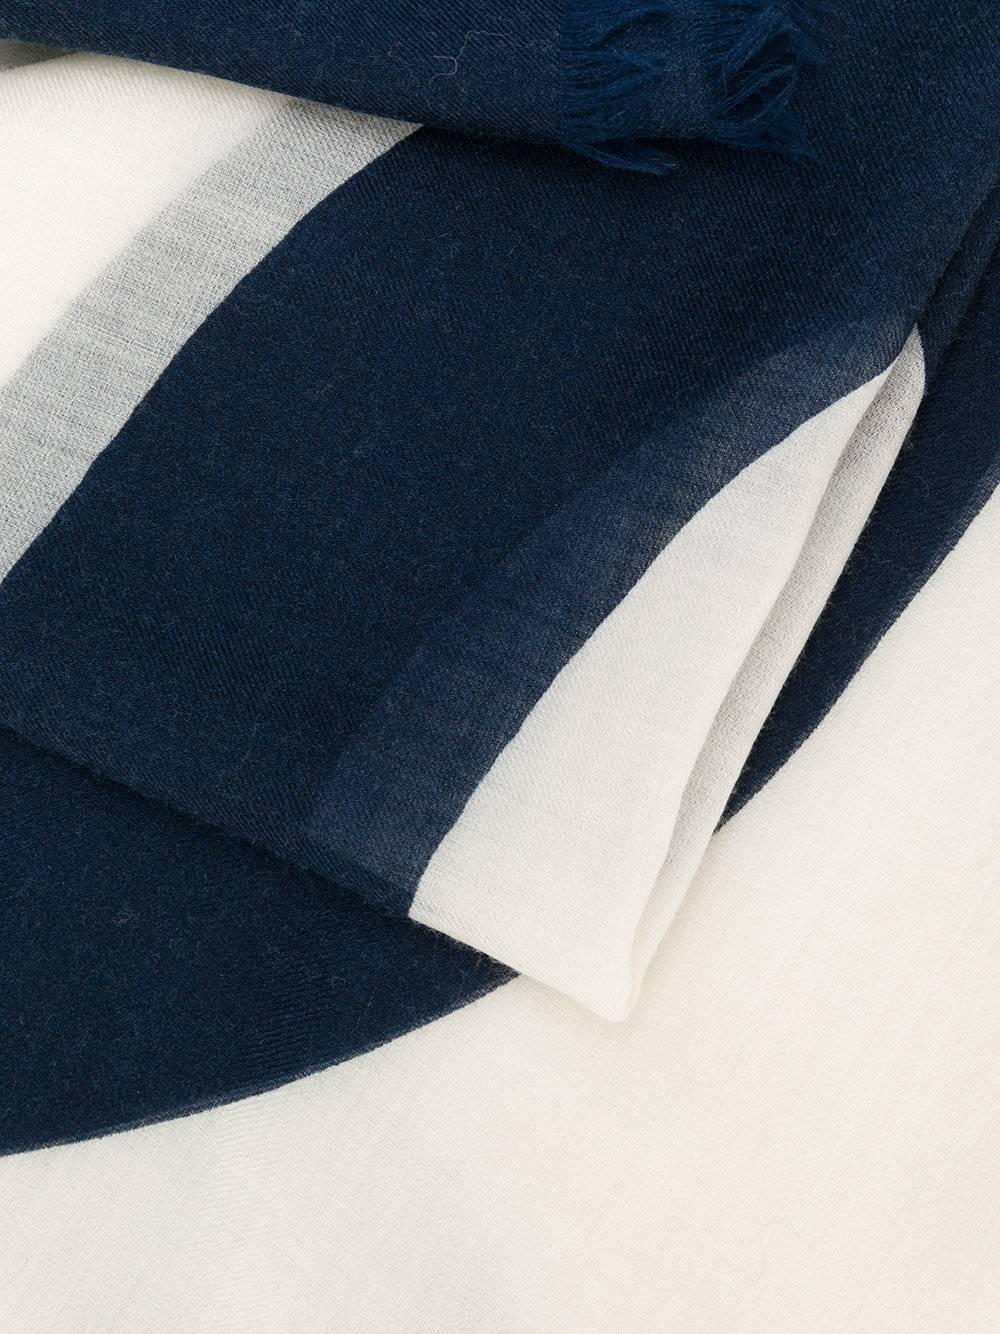 This Chanel scarf is sure to add a little Parisian sophistication to your look. Crafted in France from navy blue and white cashmere, this airplane scarf features frayed edges and an airplane print.

Colour: Navy/White

Composition: 100%